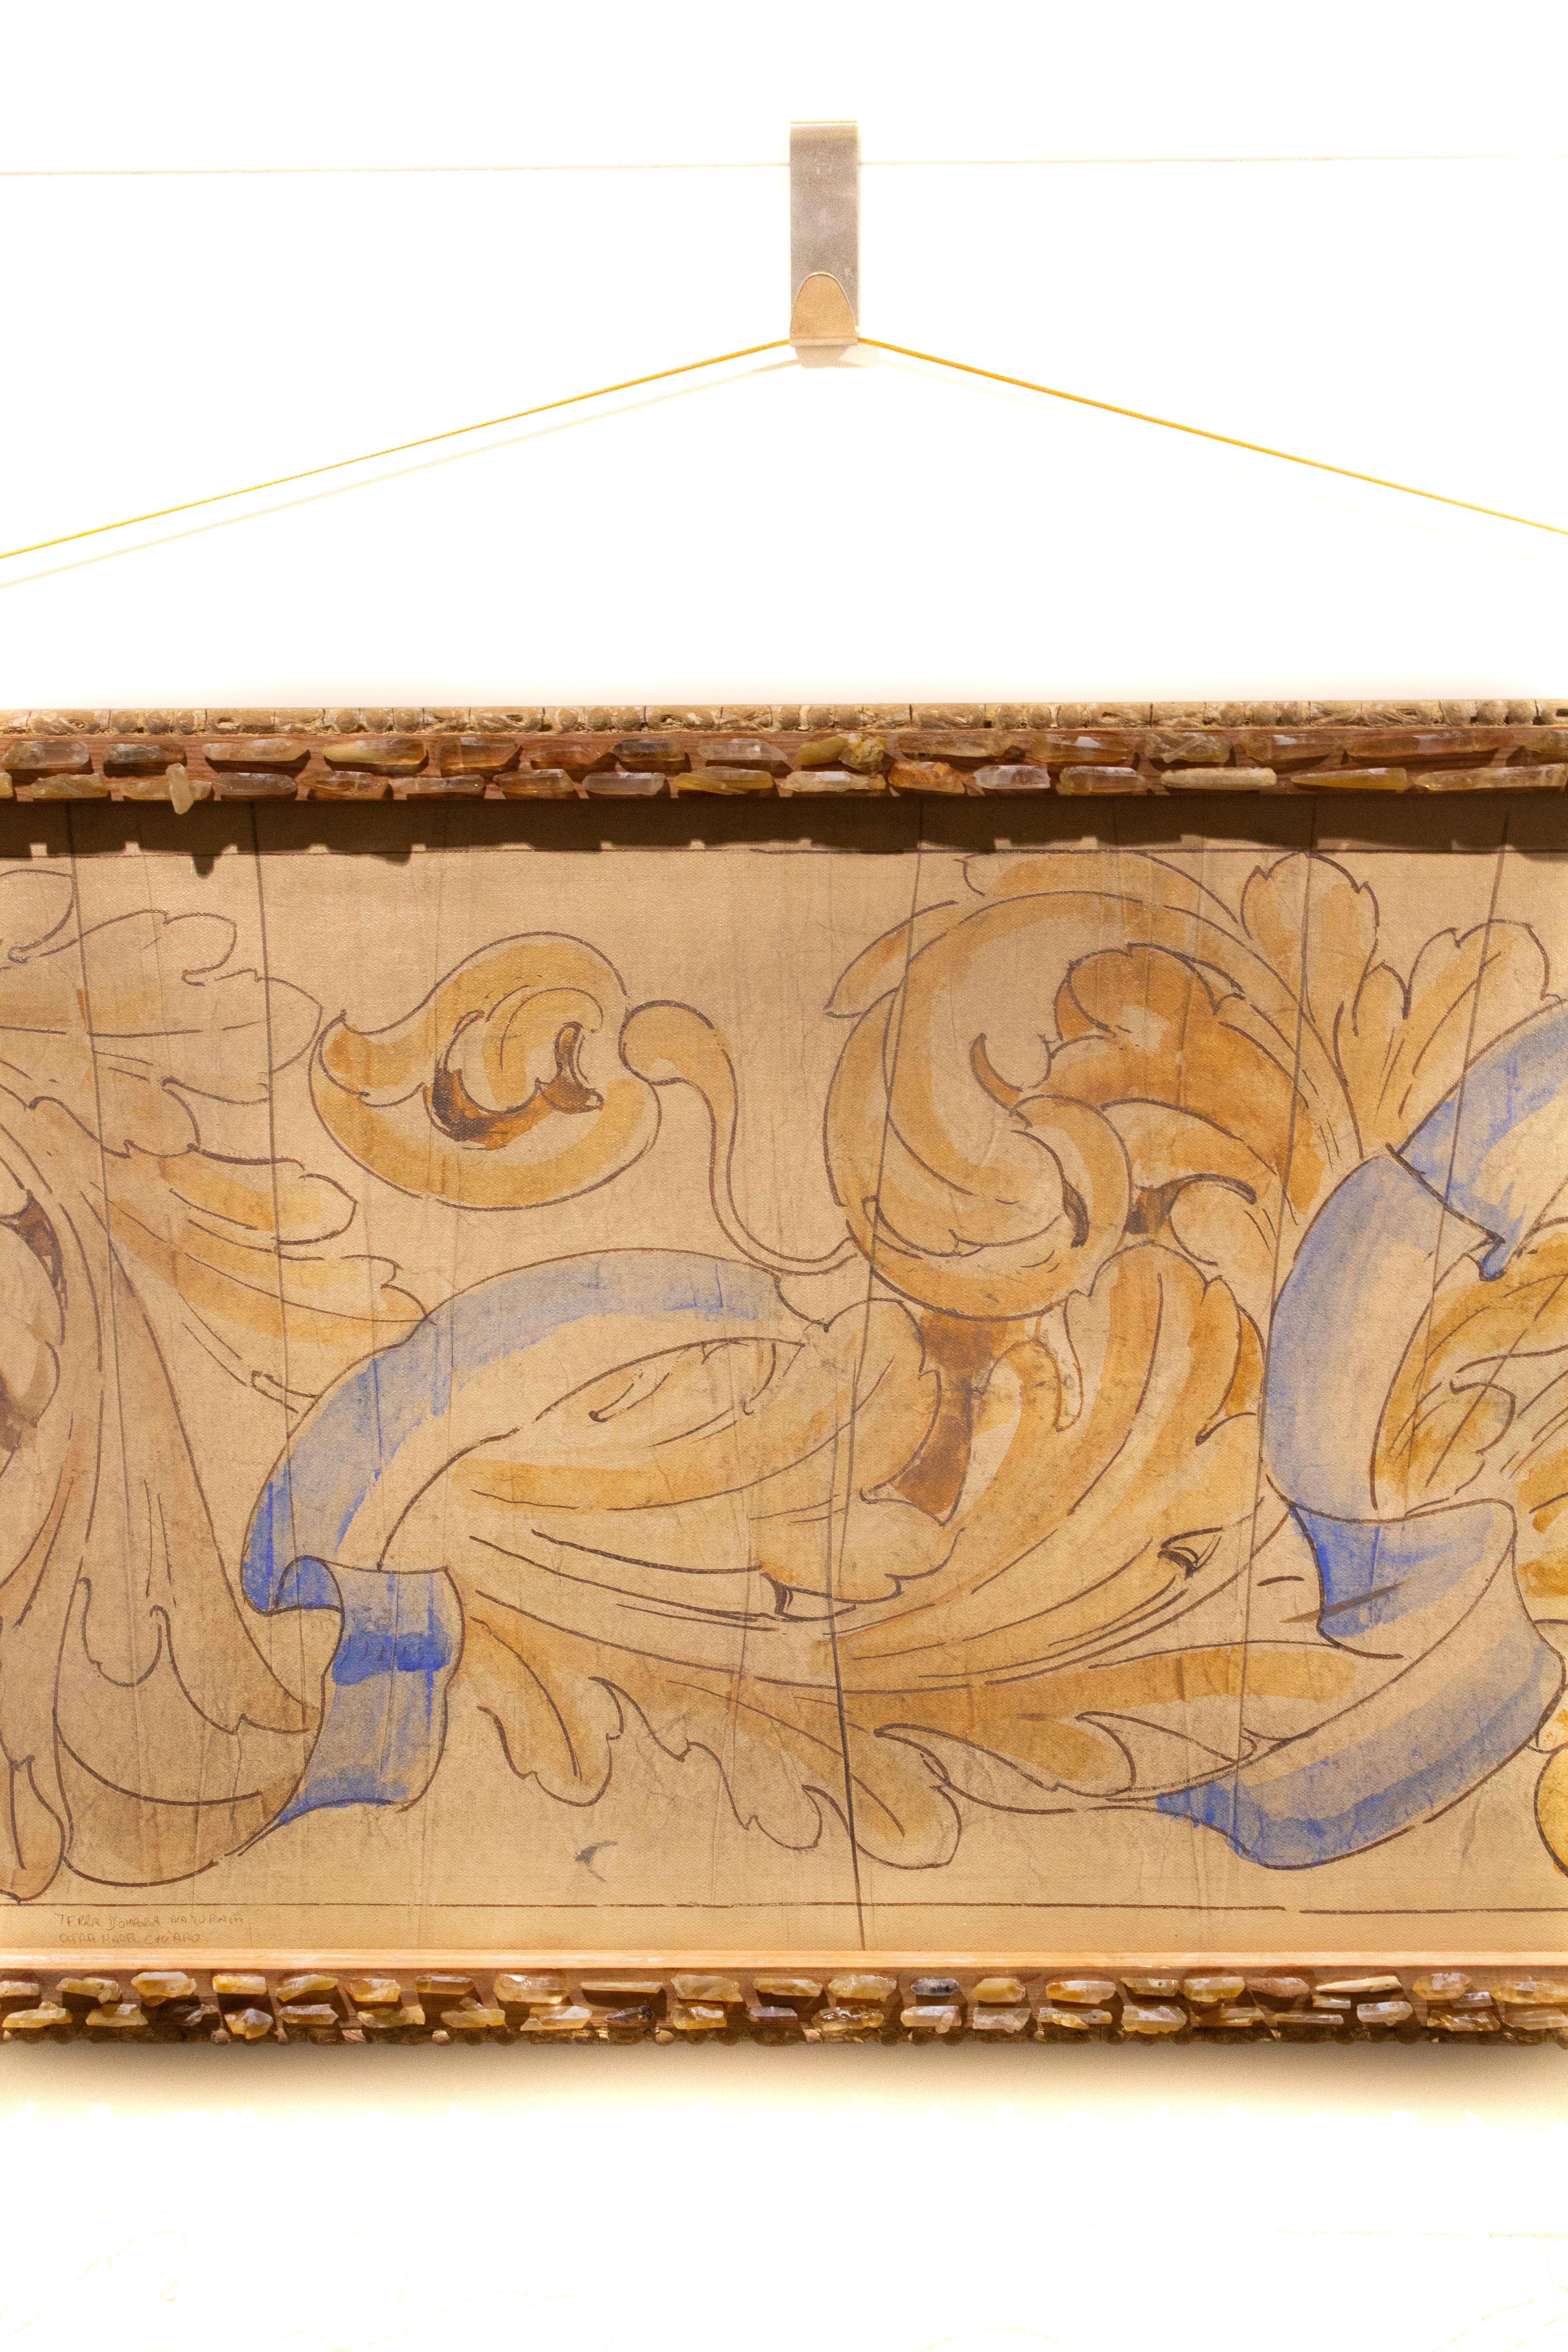 18th century Italian spolvero fresco pattern printed onto canvas and framed with an antique molding frame and citrine crystals.

Spolvero is an artistic method of transferring a design from a print to the prepared surface of a canvas, panel, or